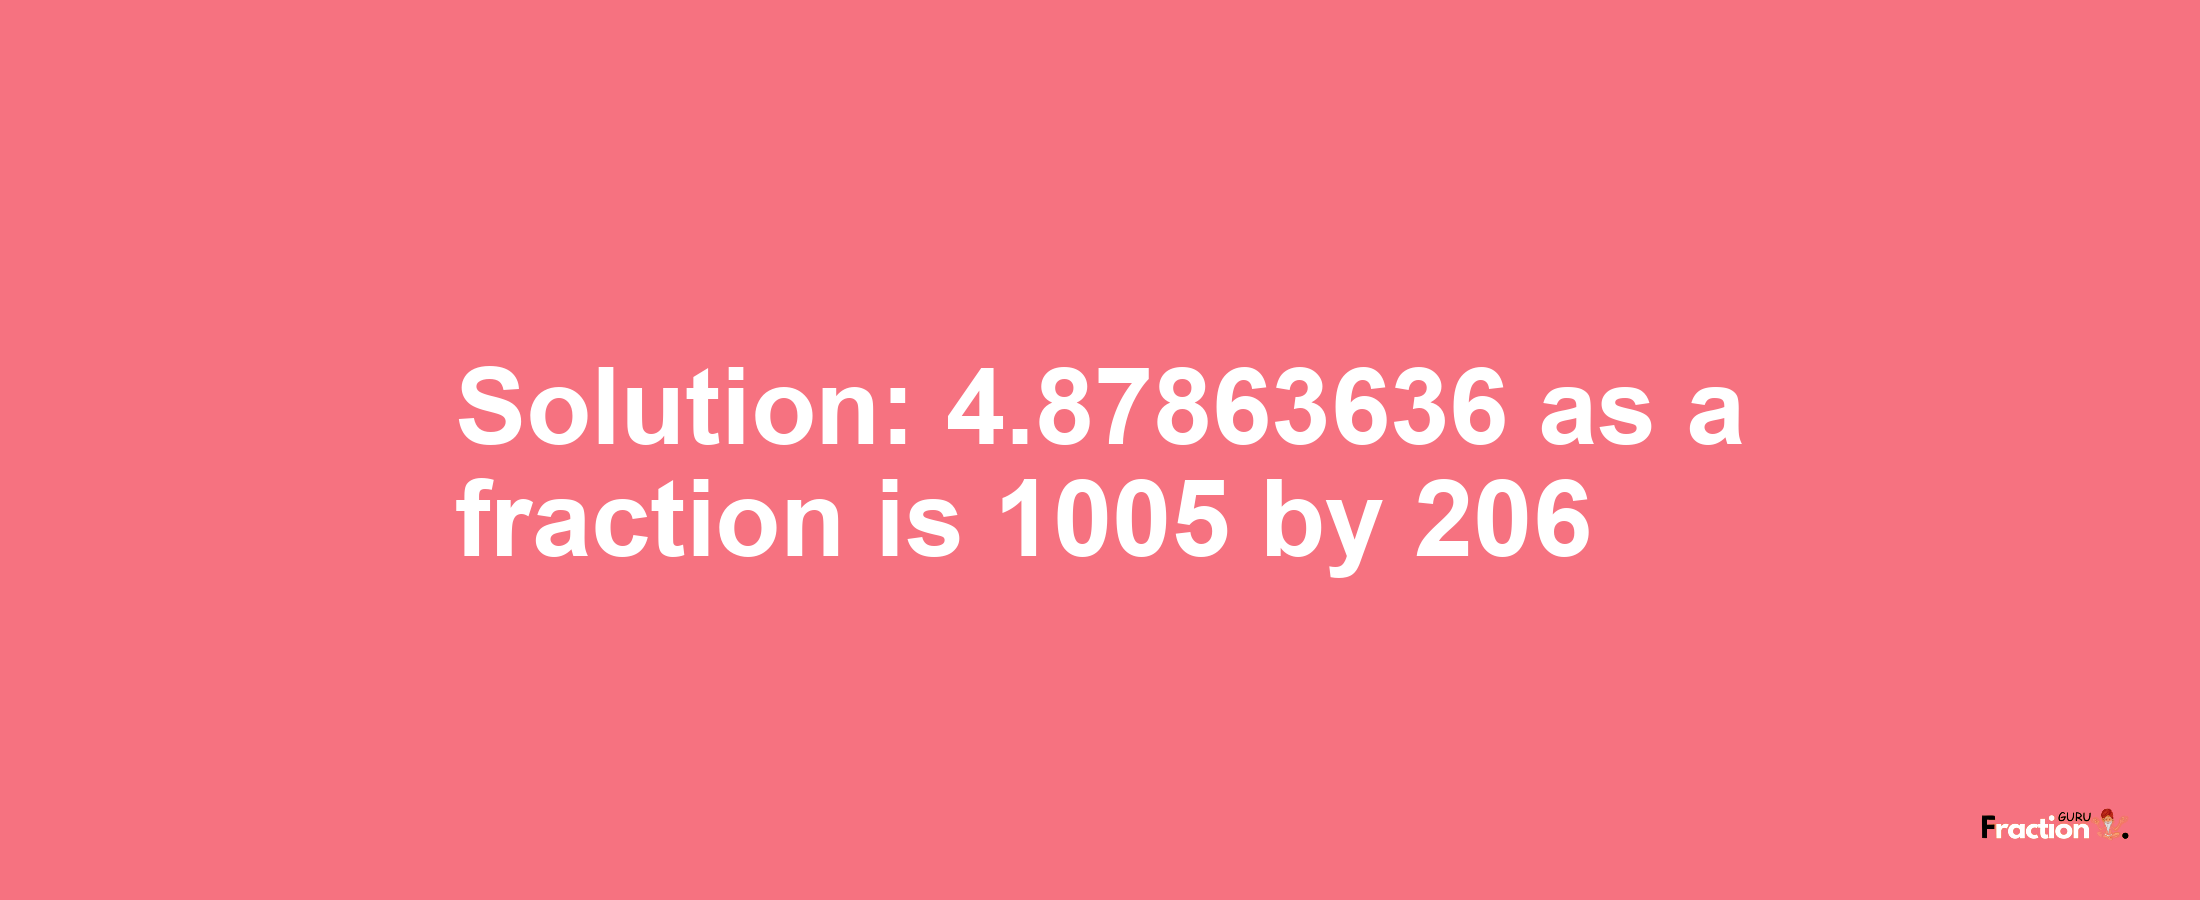 Solution:4.87863636 as a fraction is 1005/206